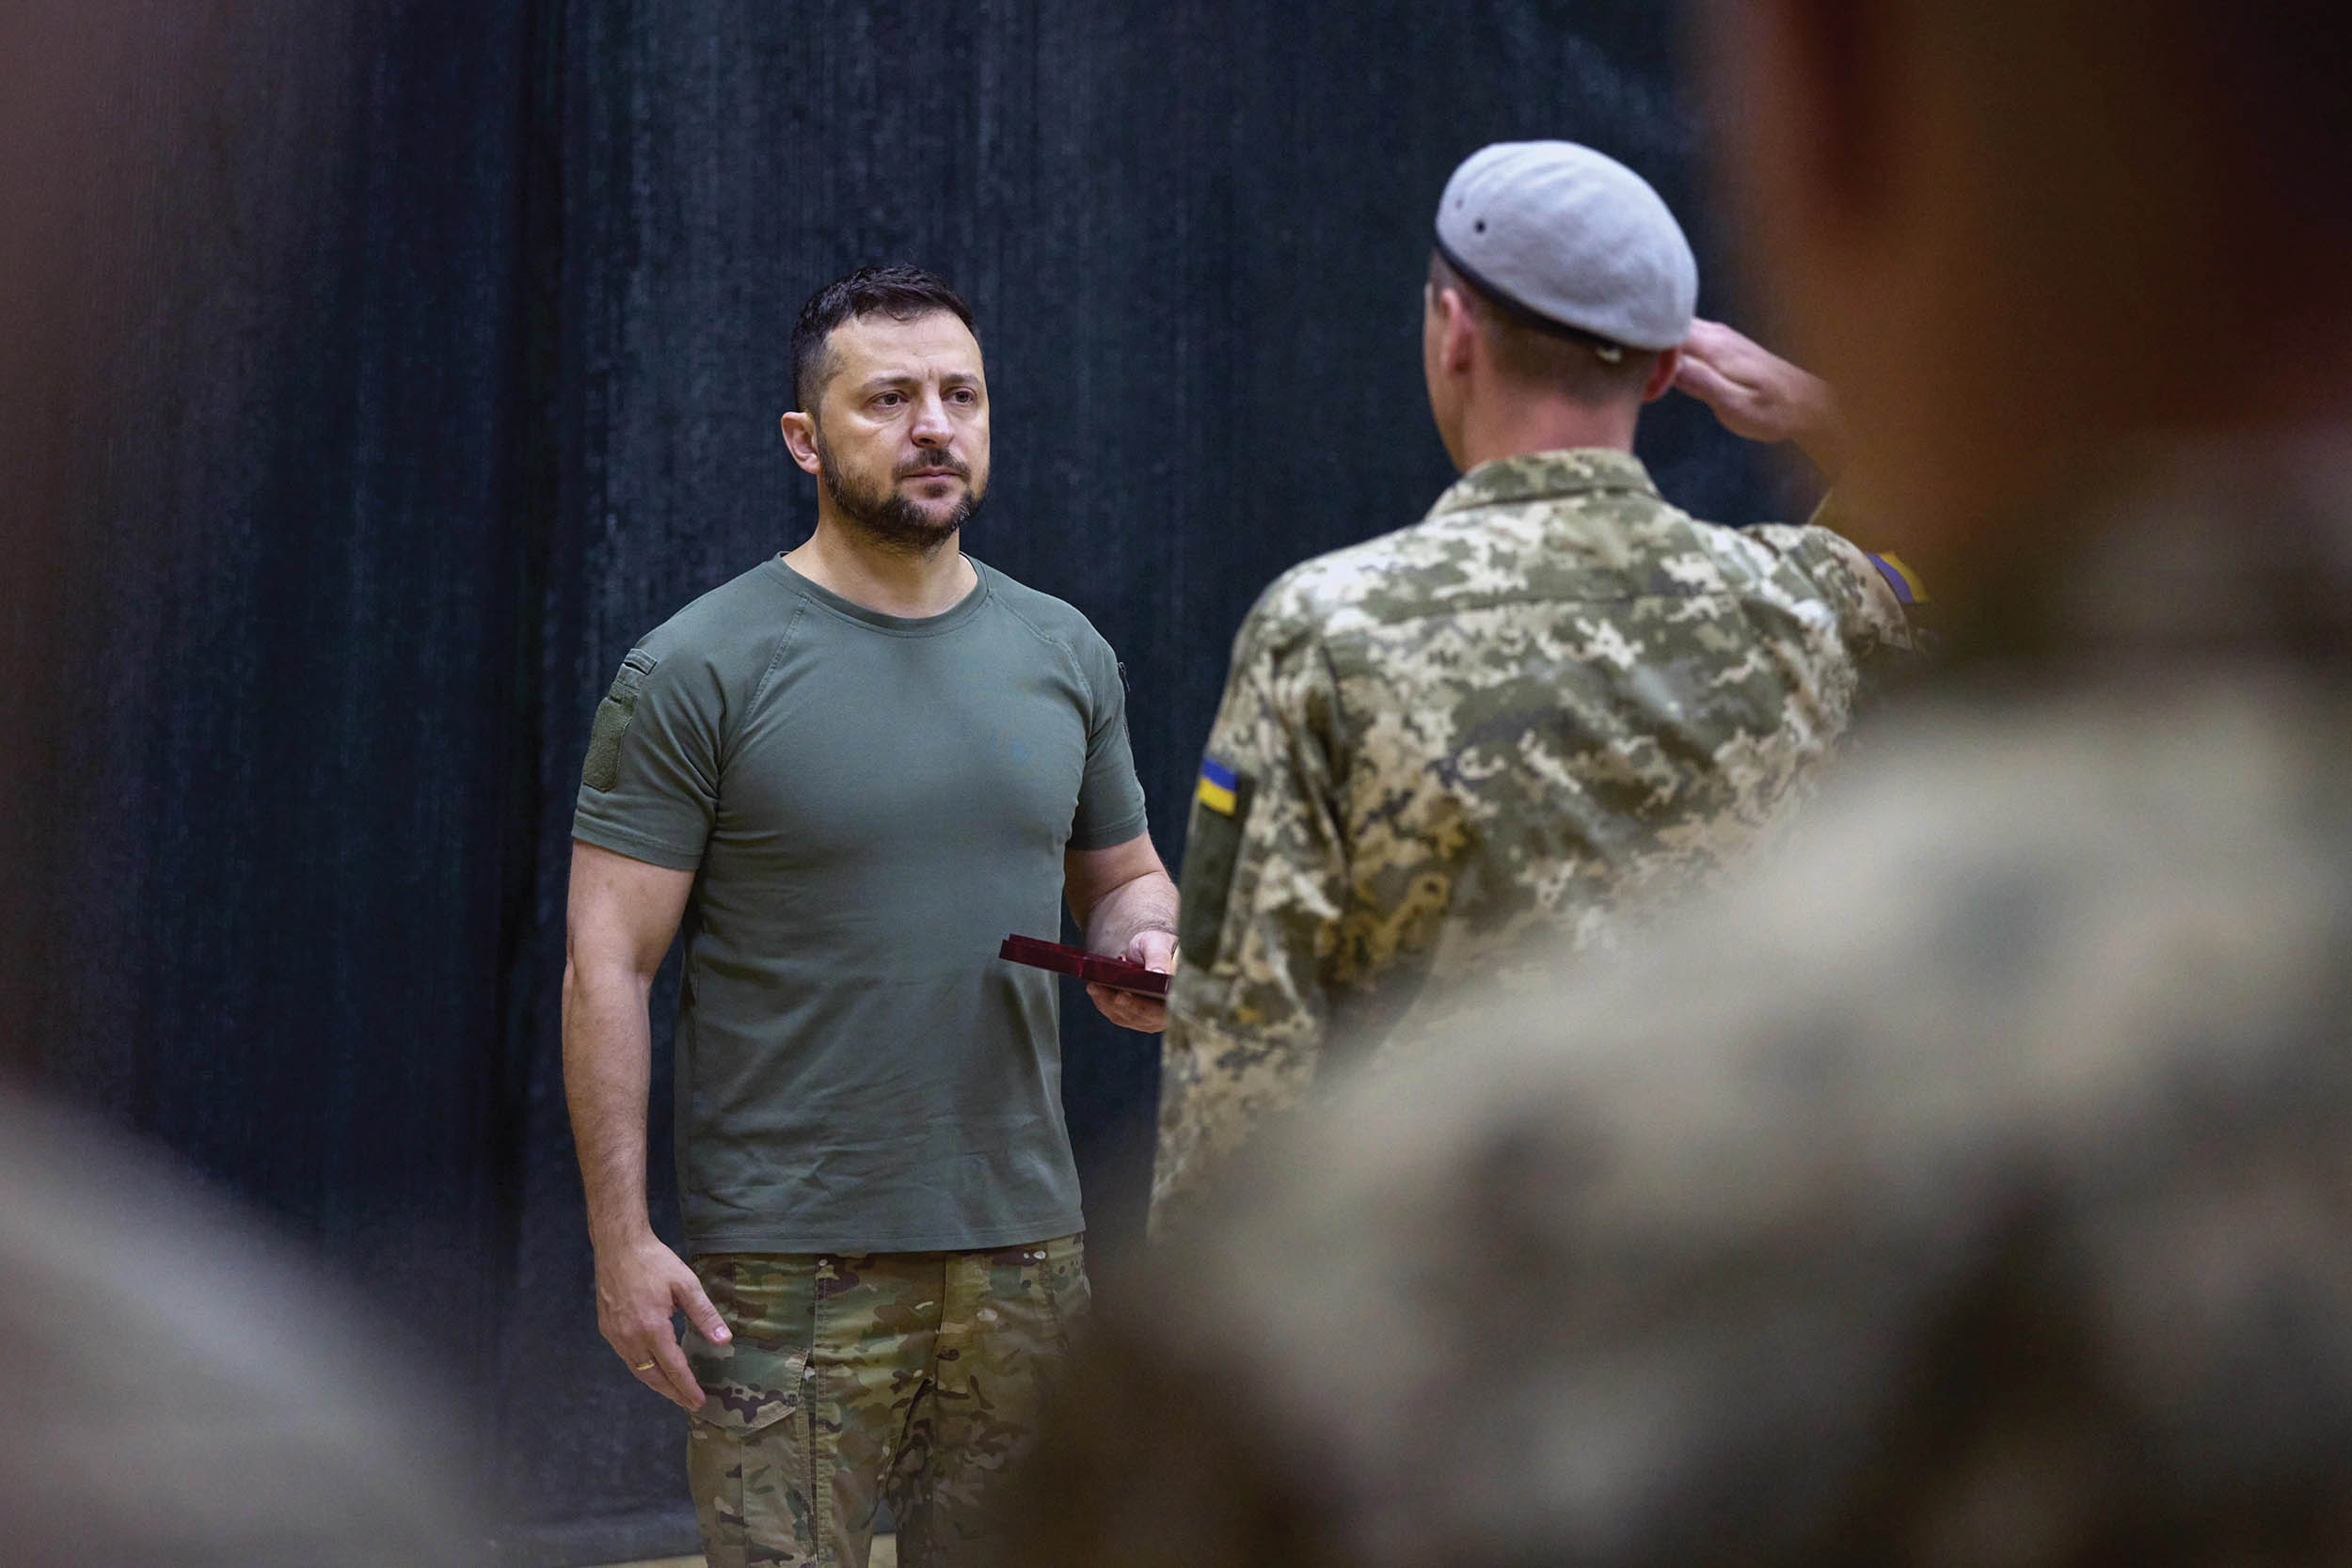 Ukrainian President Volodymyr Zelensky presents state medals to Ukrainian Special Operations Forces during ceremony, July 29, 2022, in Odesa, Ukraine (Ukrainian Presidential Press Office)